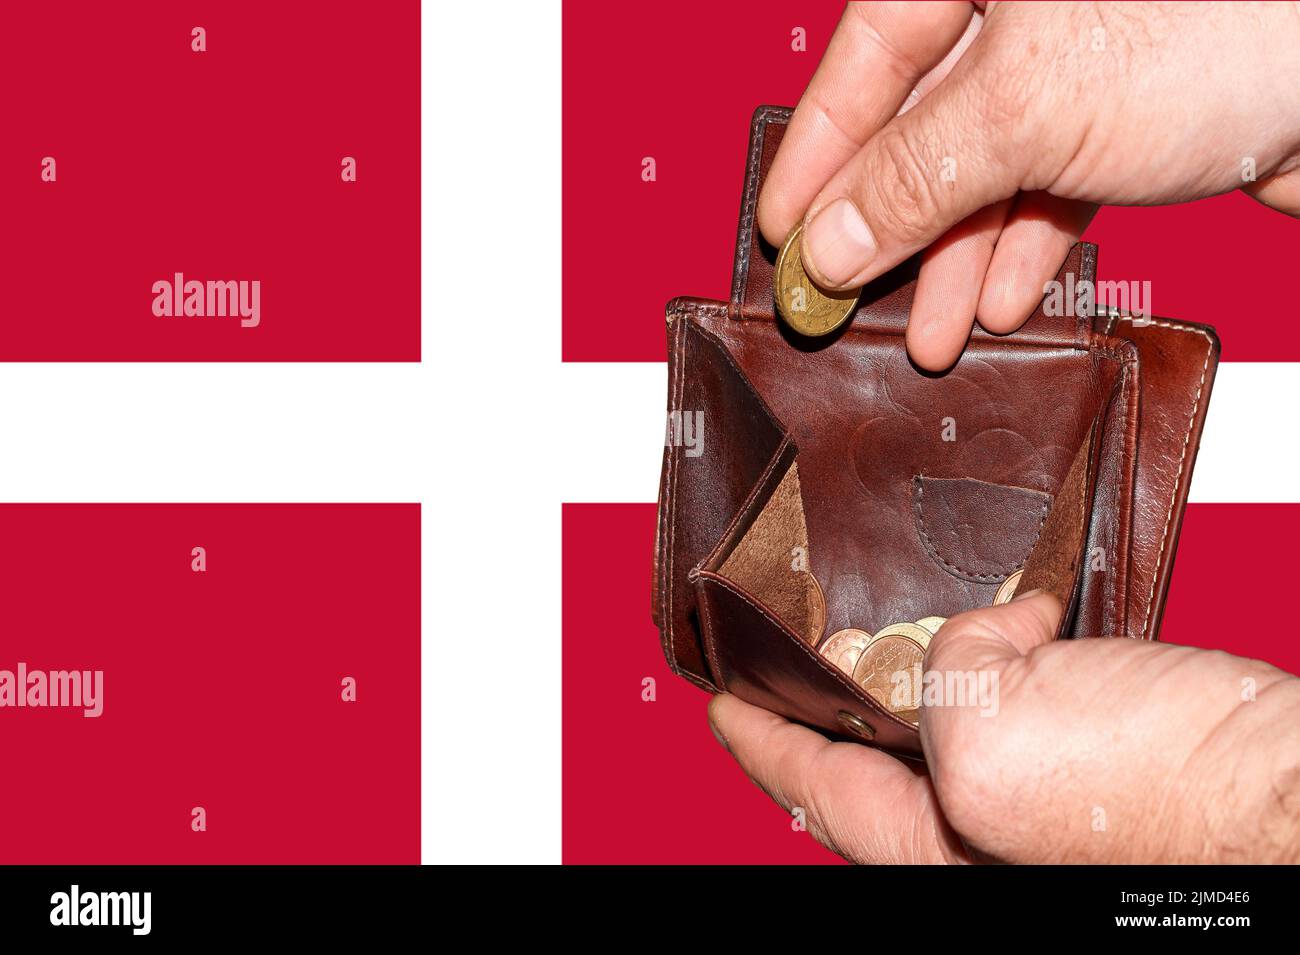 Empty wallet shows the global financial economic crisis triggered by the corona virus in Denmark Stock Photo